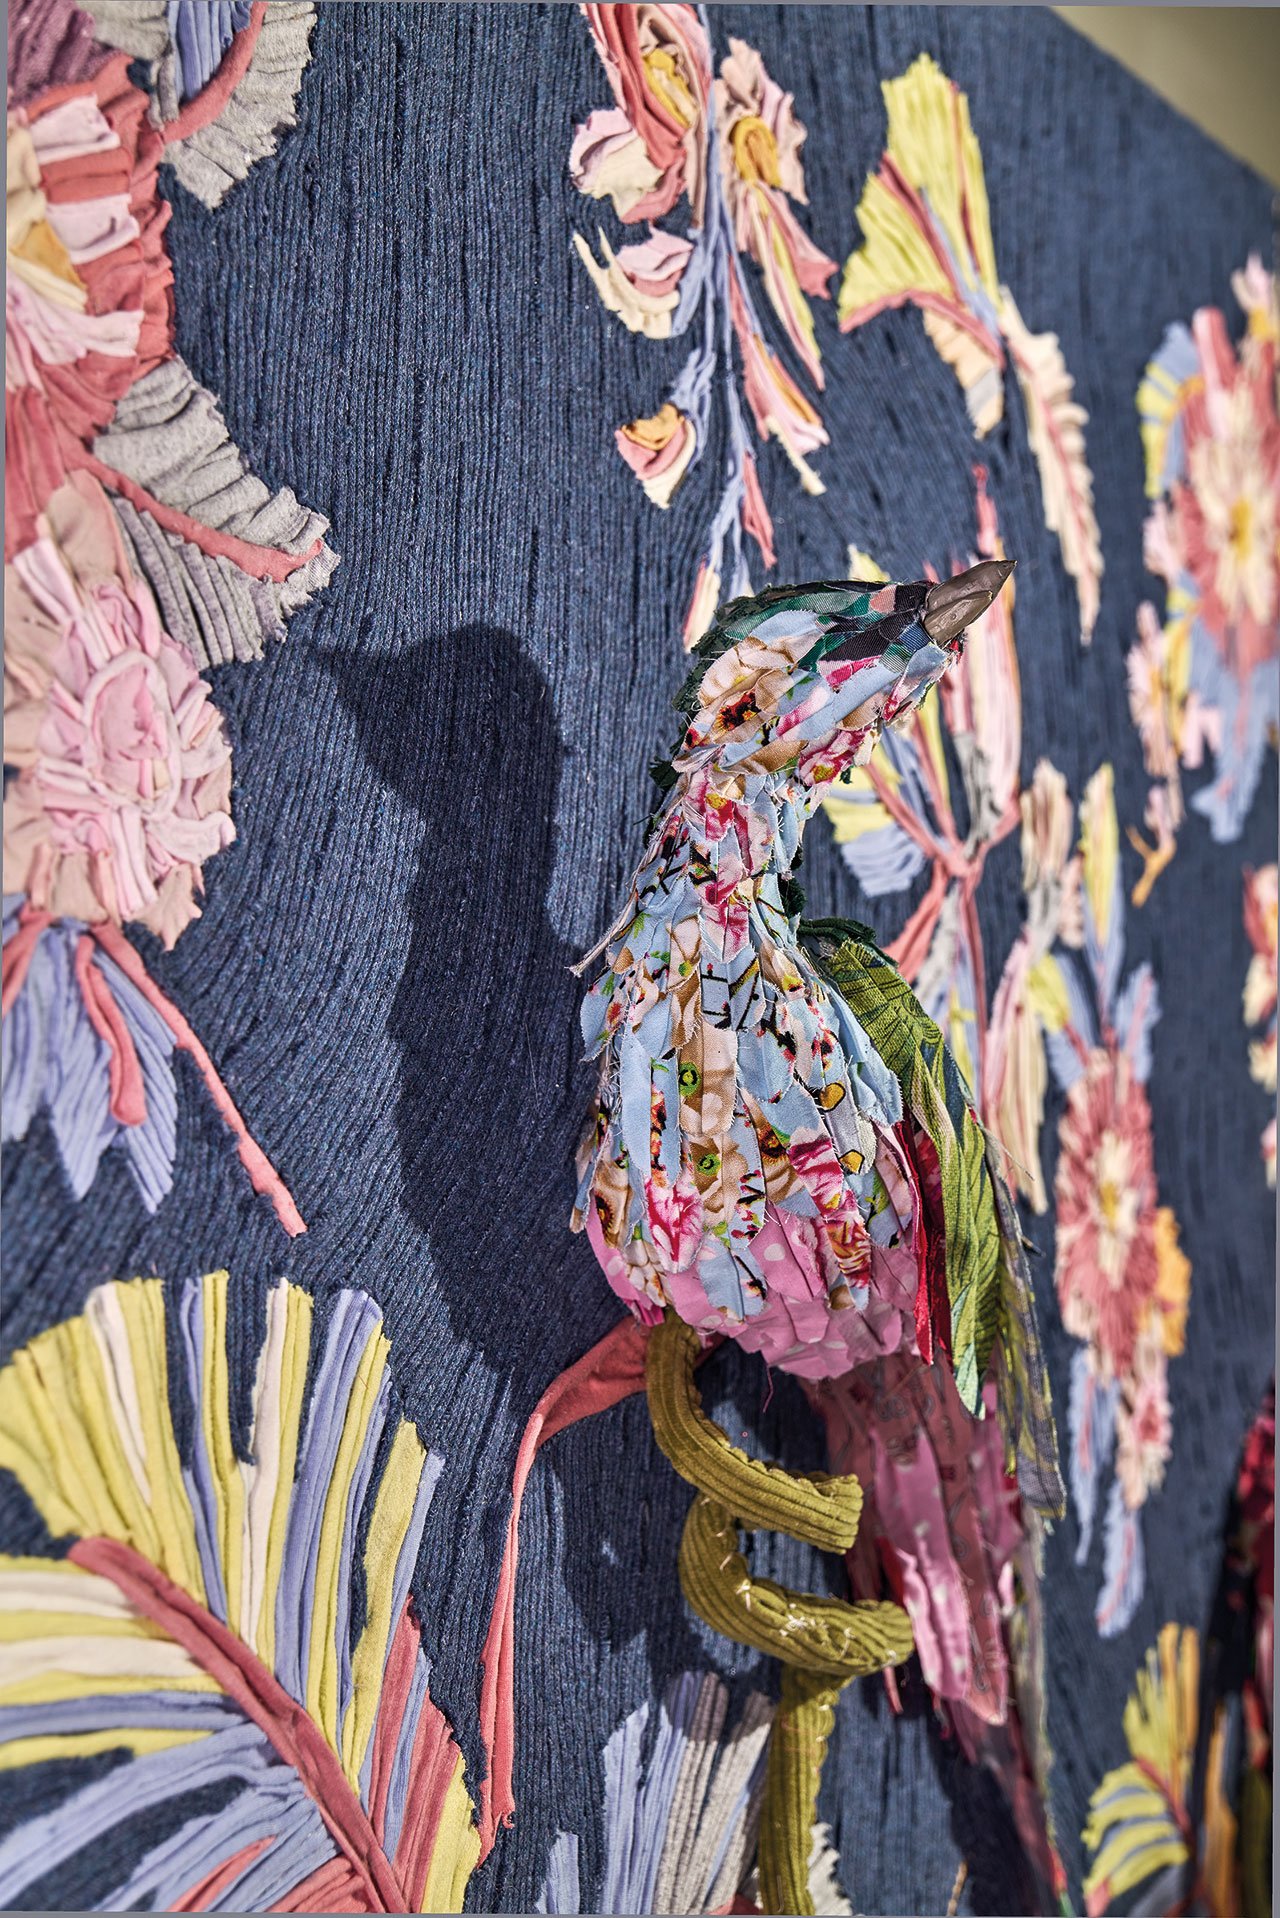 Tamara Kostianovsky, The Conference of the Birds (detail), 2021. Discarded Textiles on Wood. 48 x 64 x 8 in. Courtesy of Slag Gallery and Artist